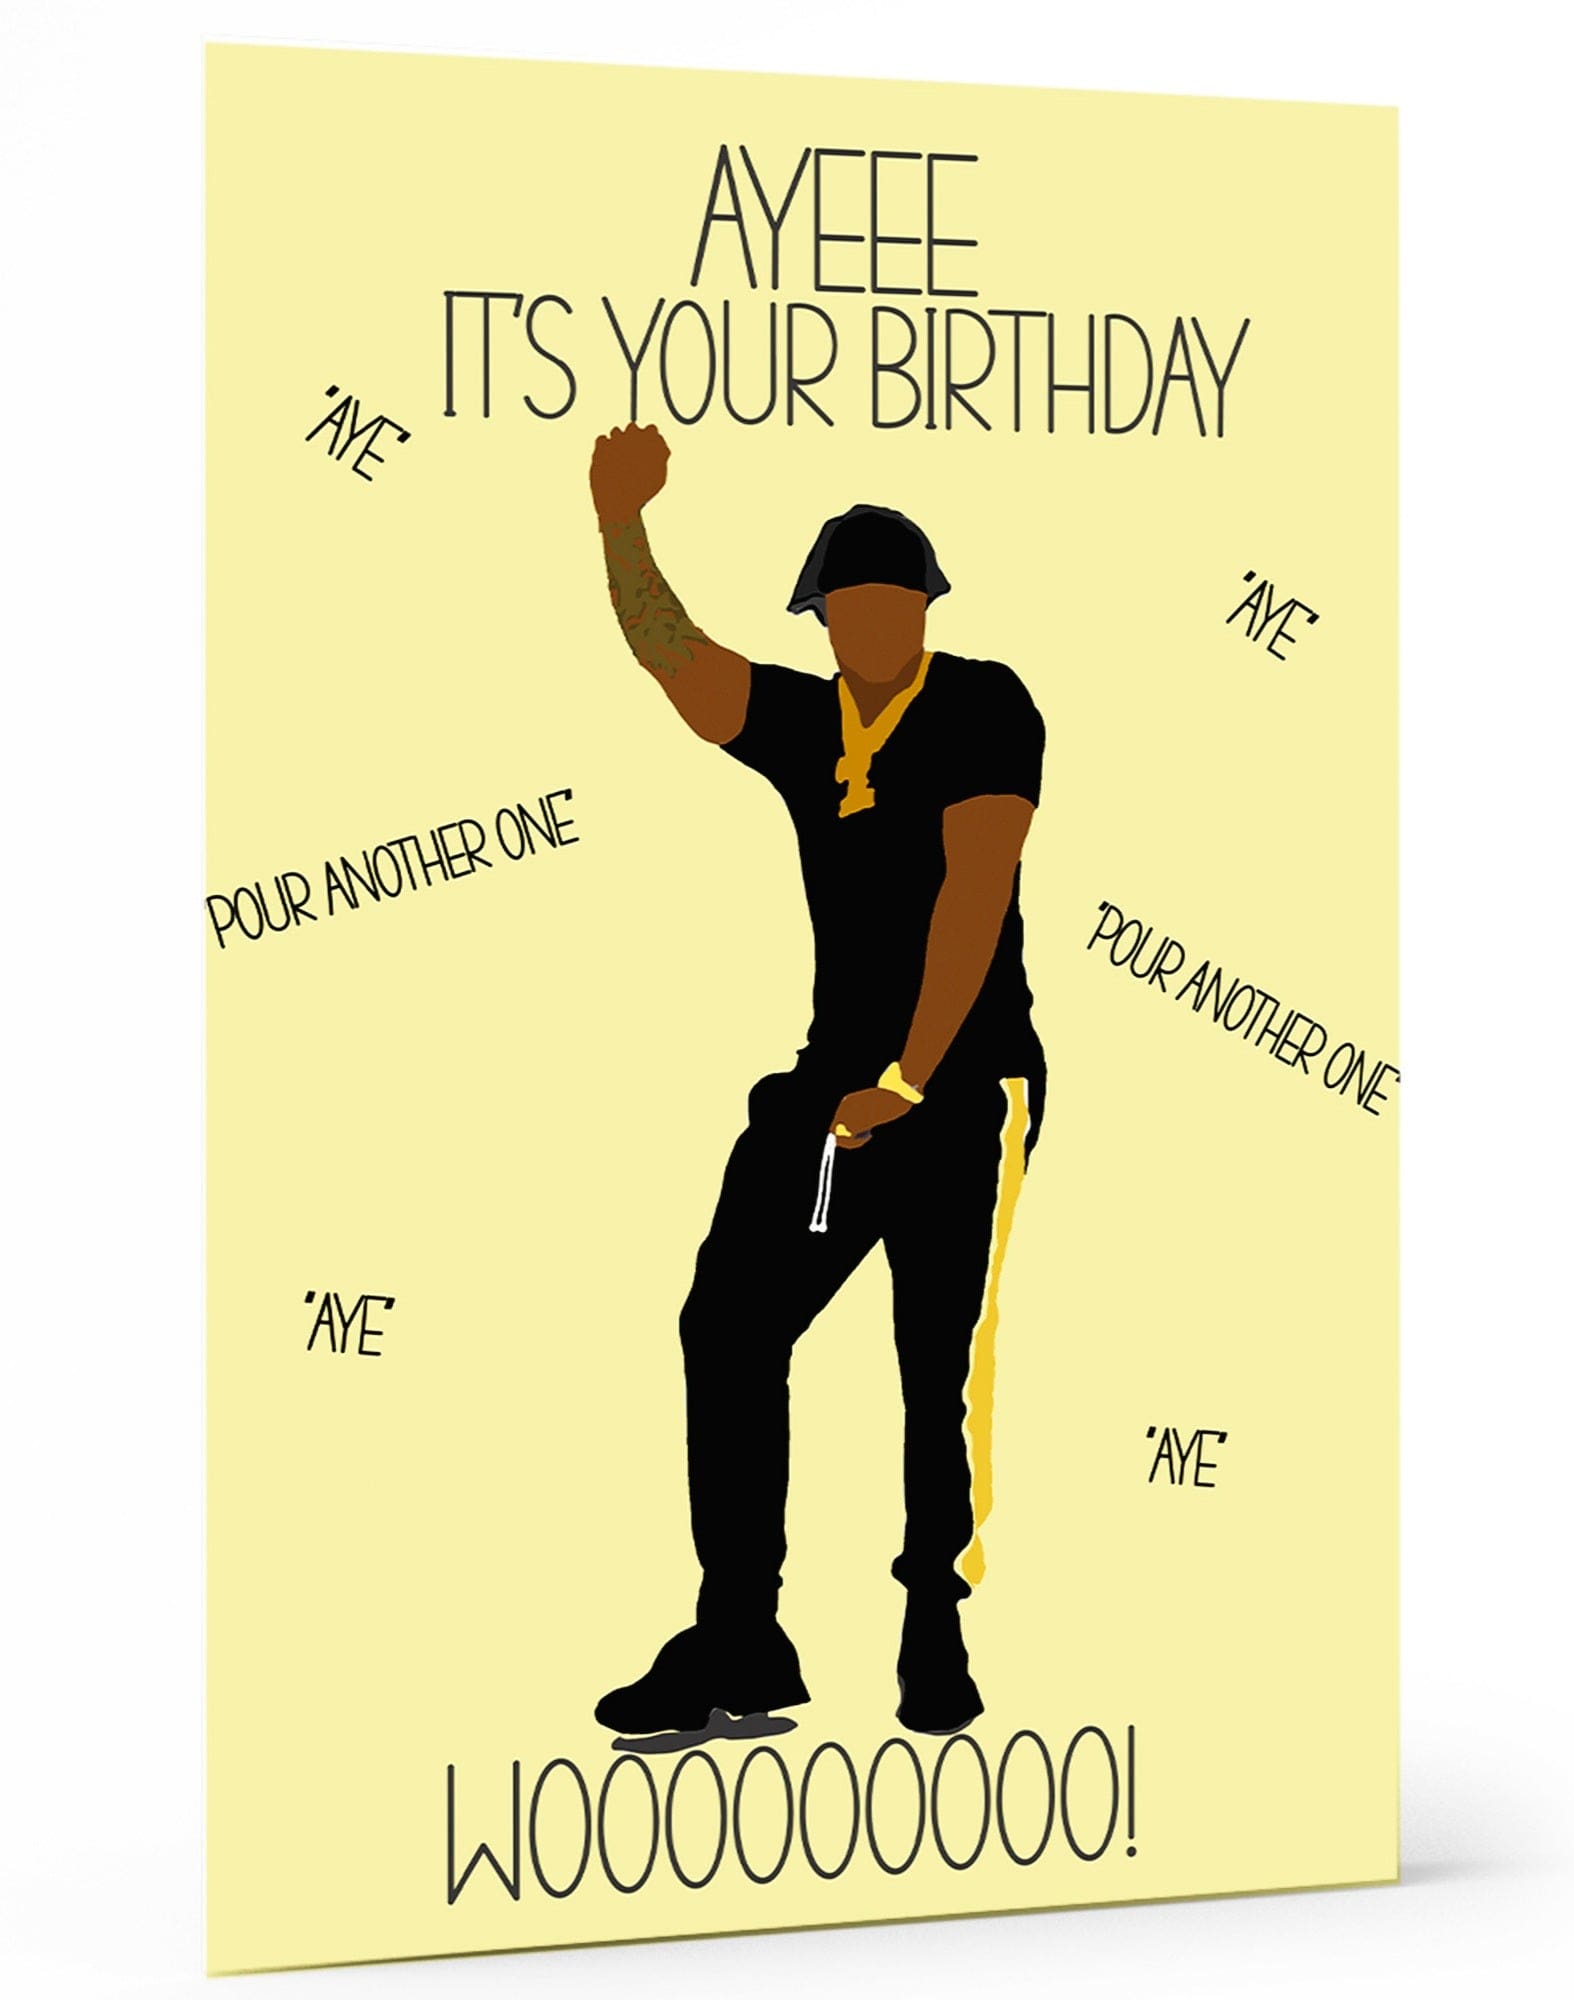 Ayeee Birthday Card, wakuda, african print fans, black-owned brands, black pound day